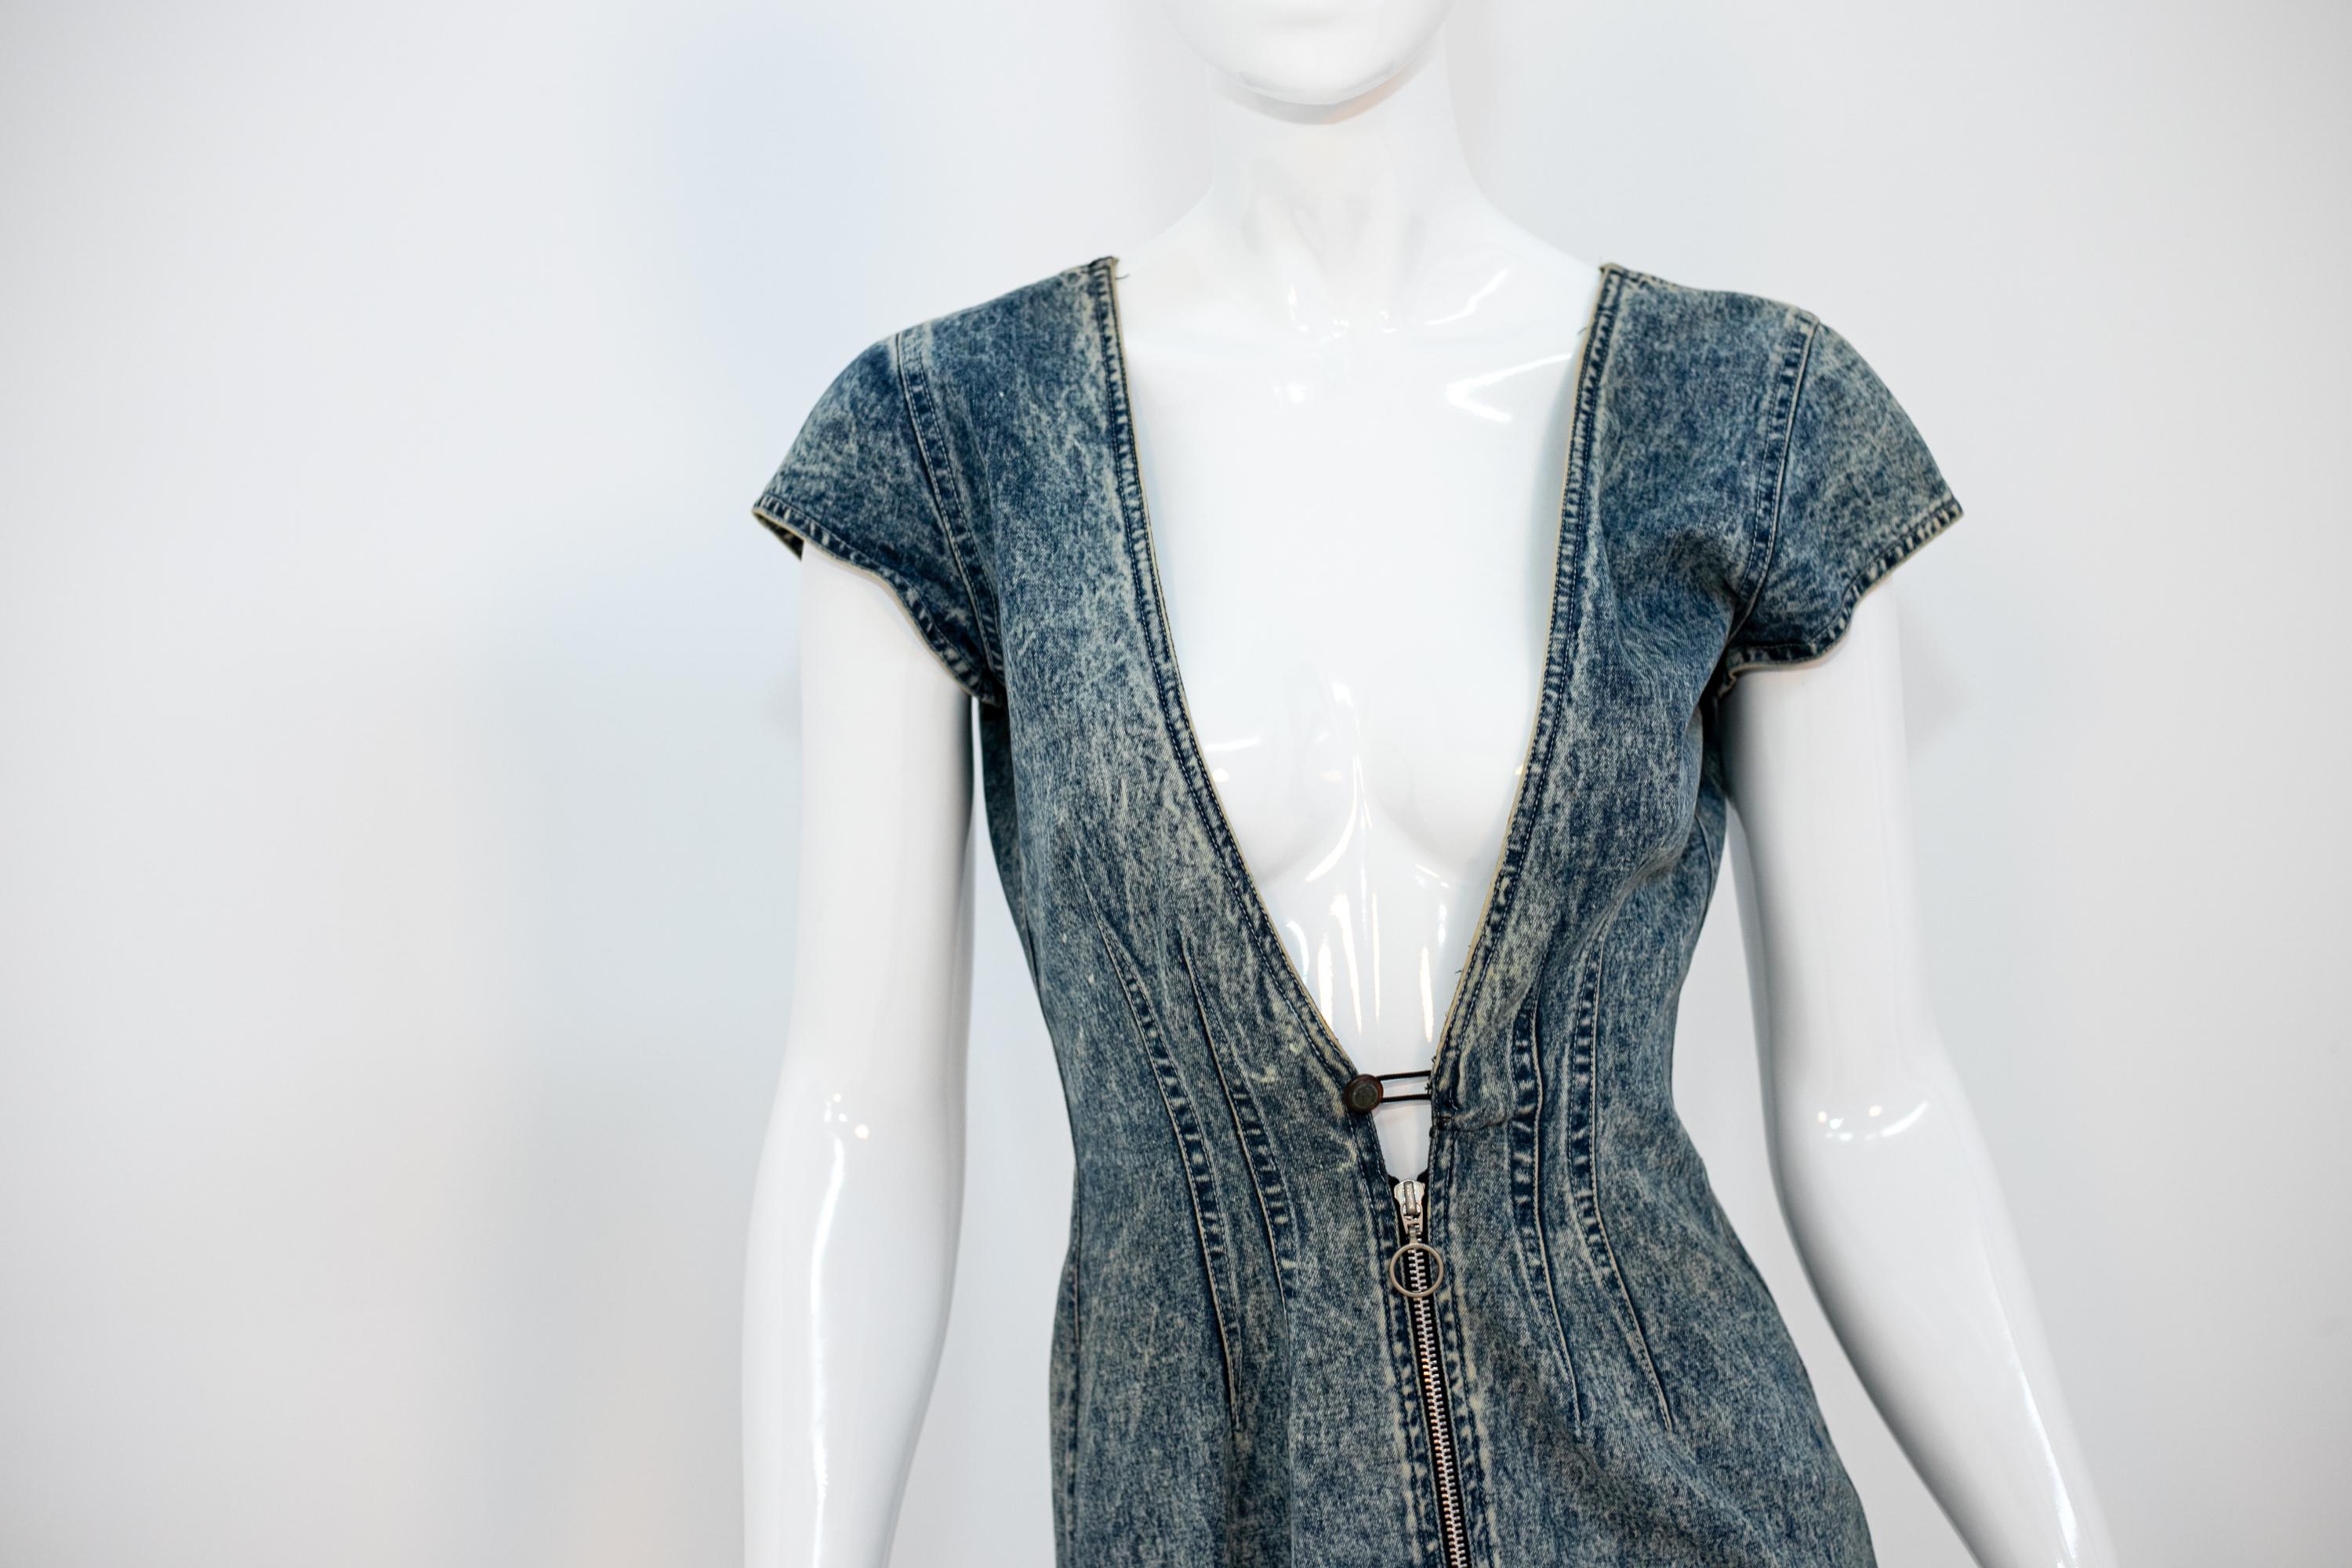 Nice casual denim Pop Style dress from the 80s, fine Italian manufacture.
The dress is made entirely of denim, very elegant and fitted.
The dress is thigh-length, with short sleeves. The special feature of the dress is its very deep neckline, which